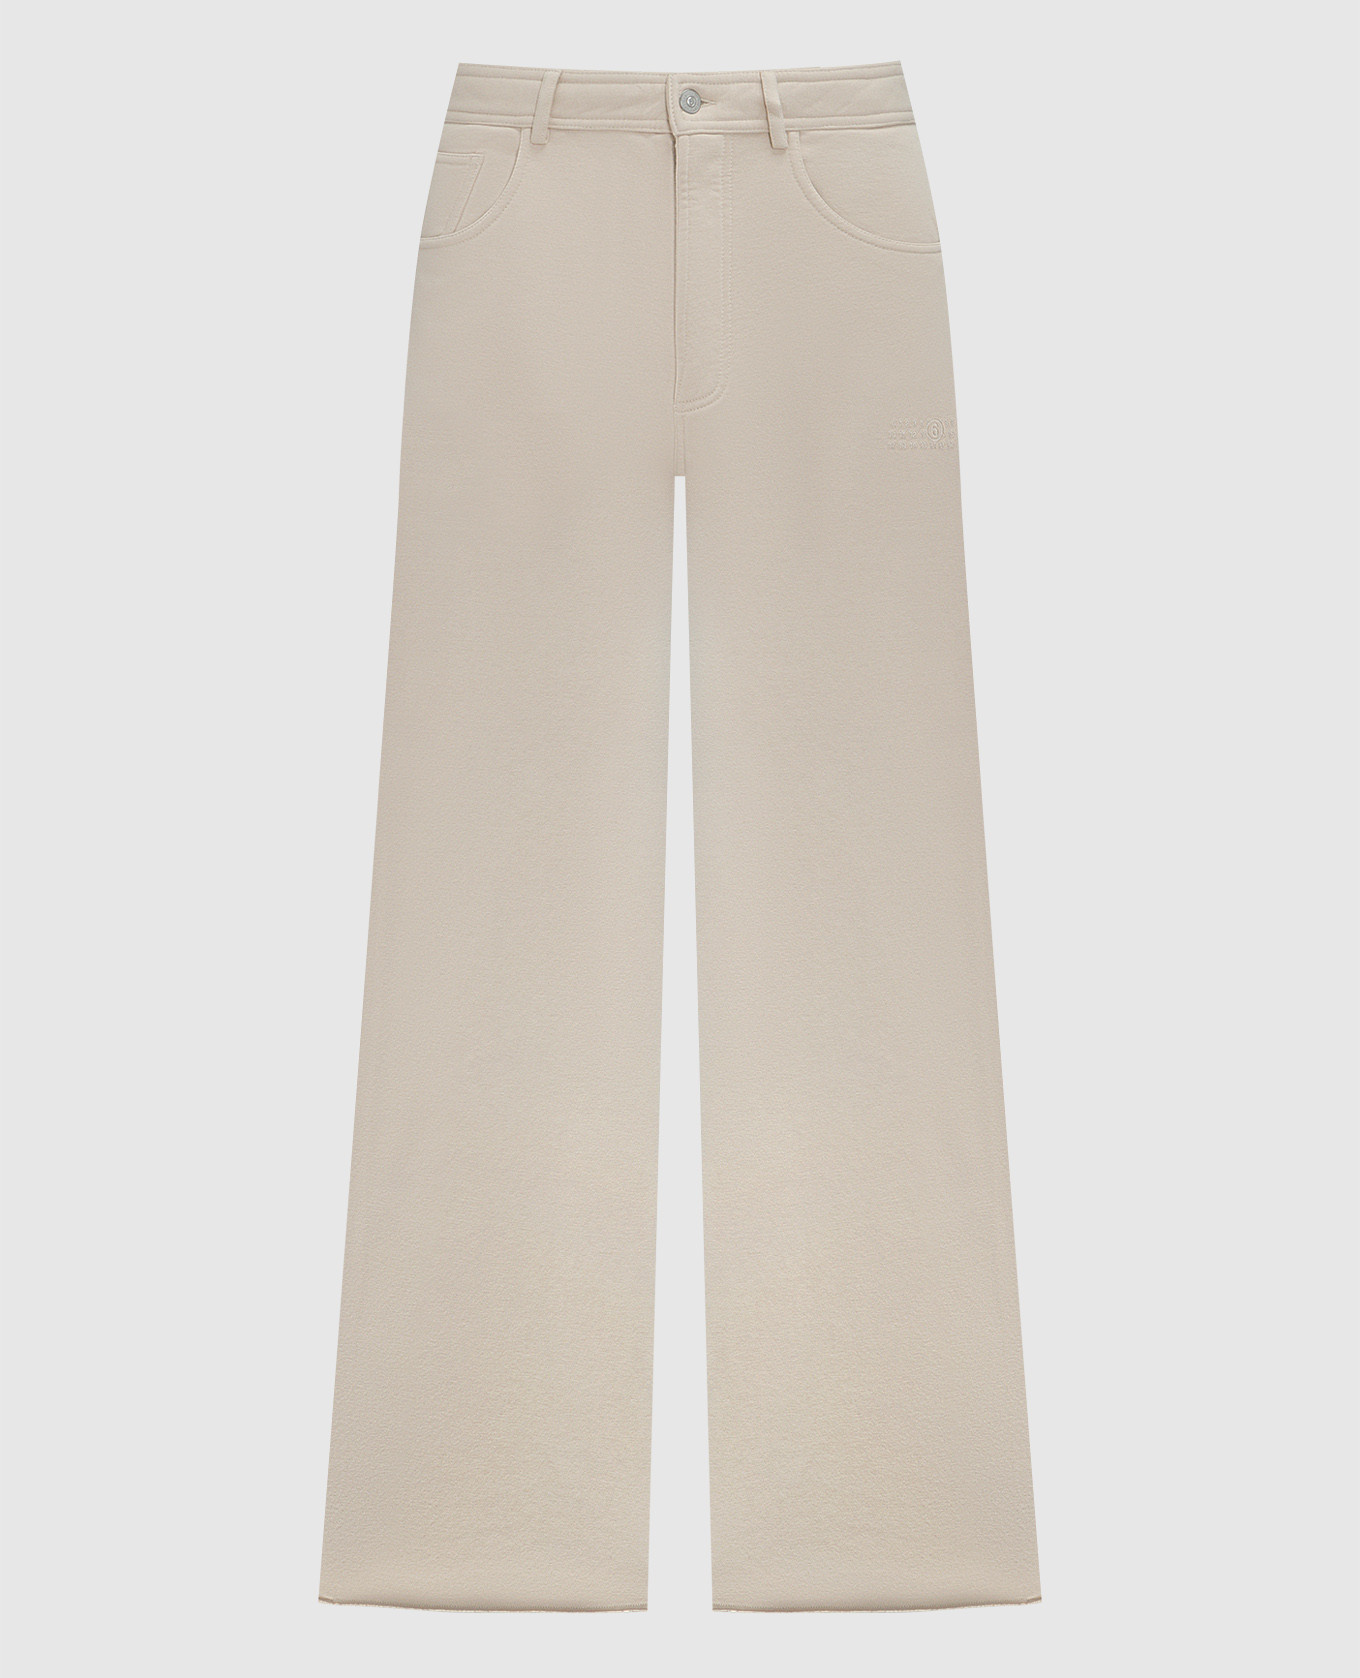 Beige pants with logo embroidery